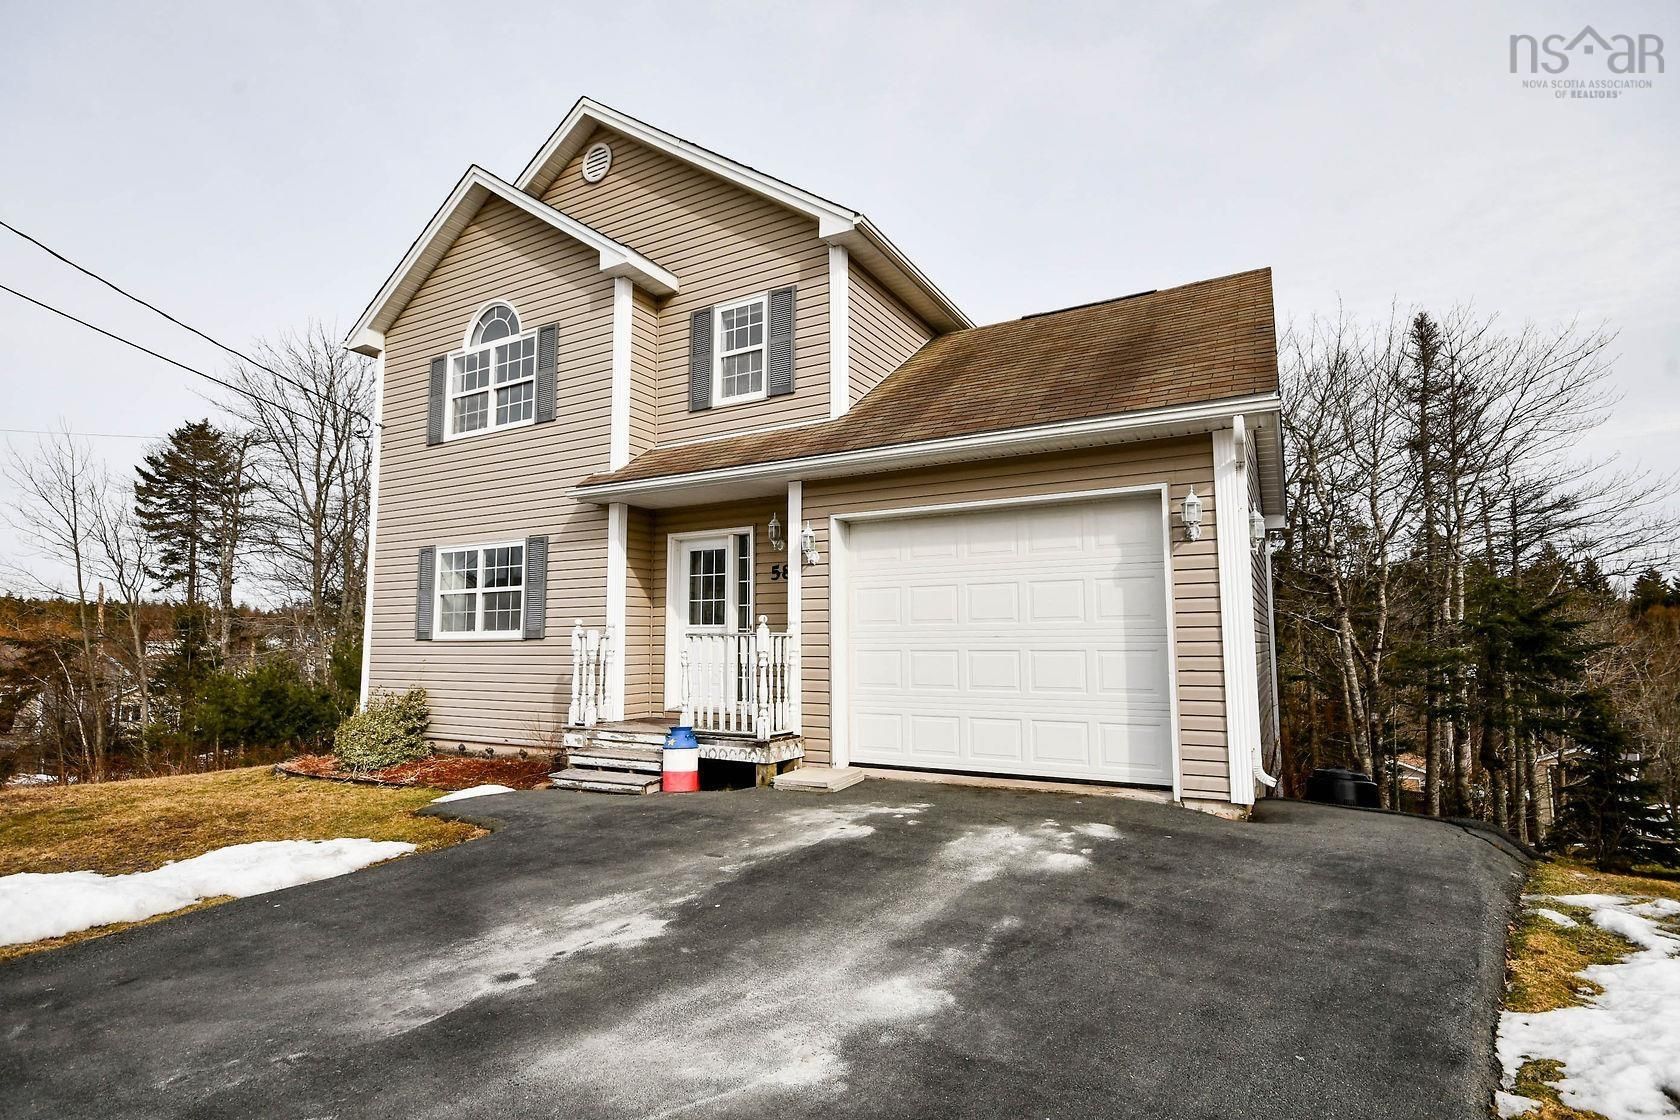 New property listed in 26-Beaverbank, Upper Sackville, Halifax-Dartmouth